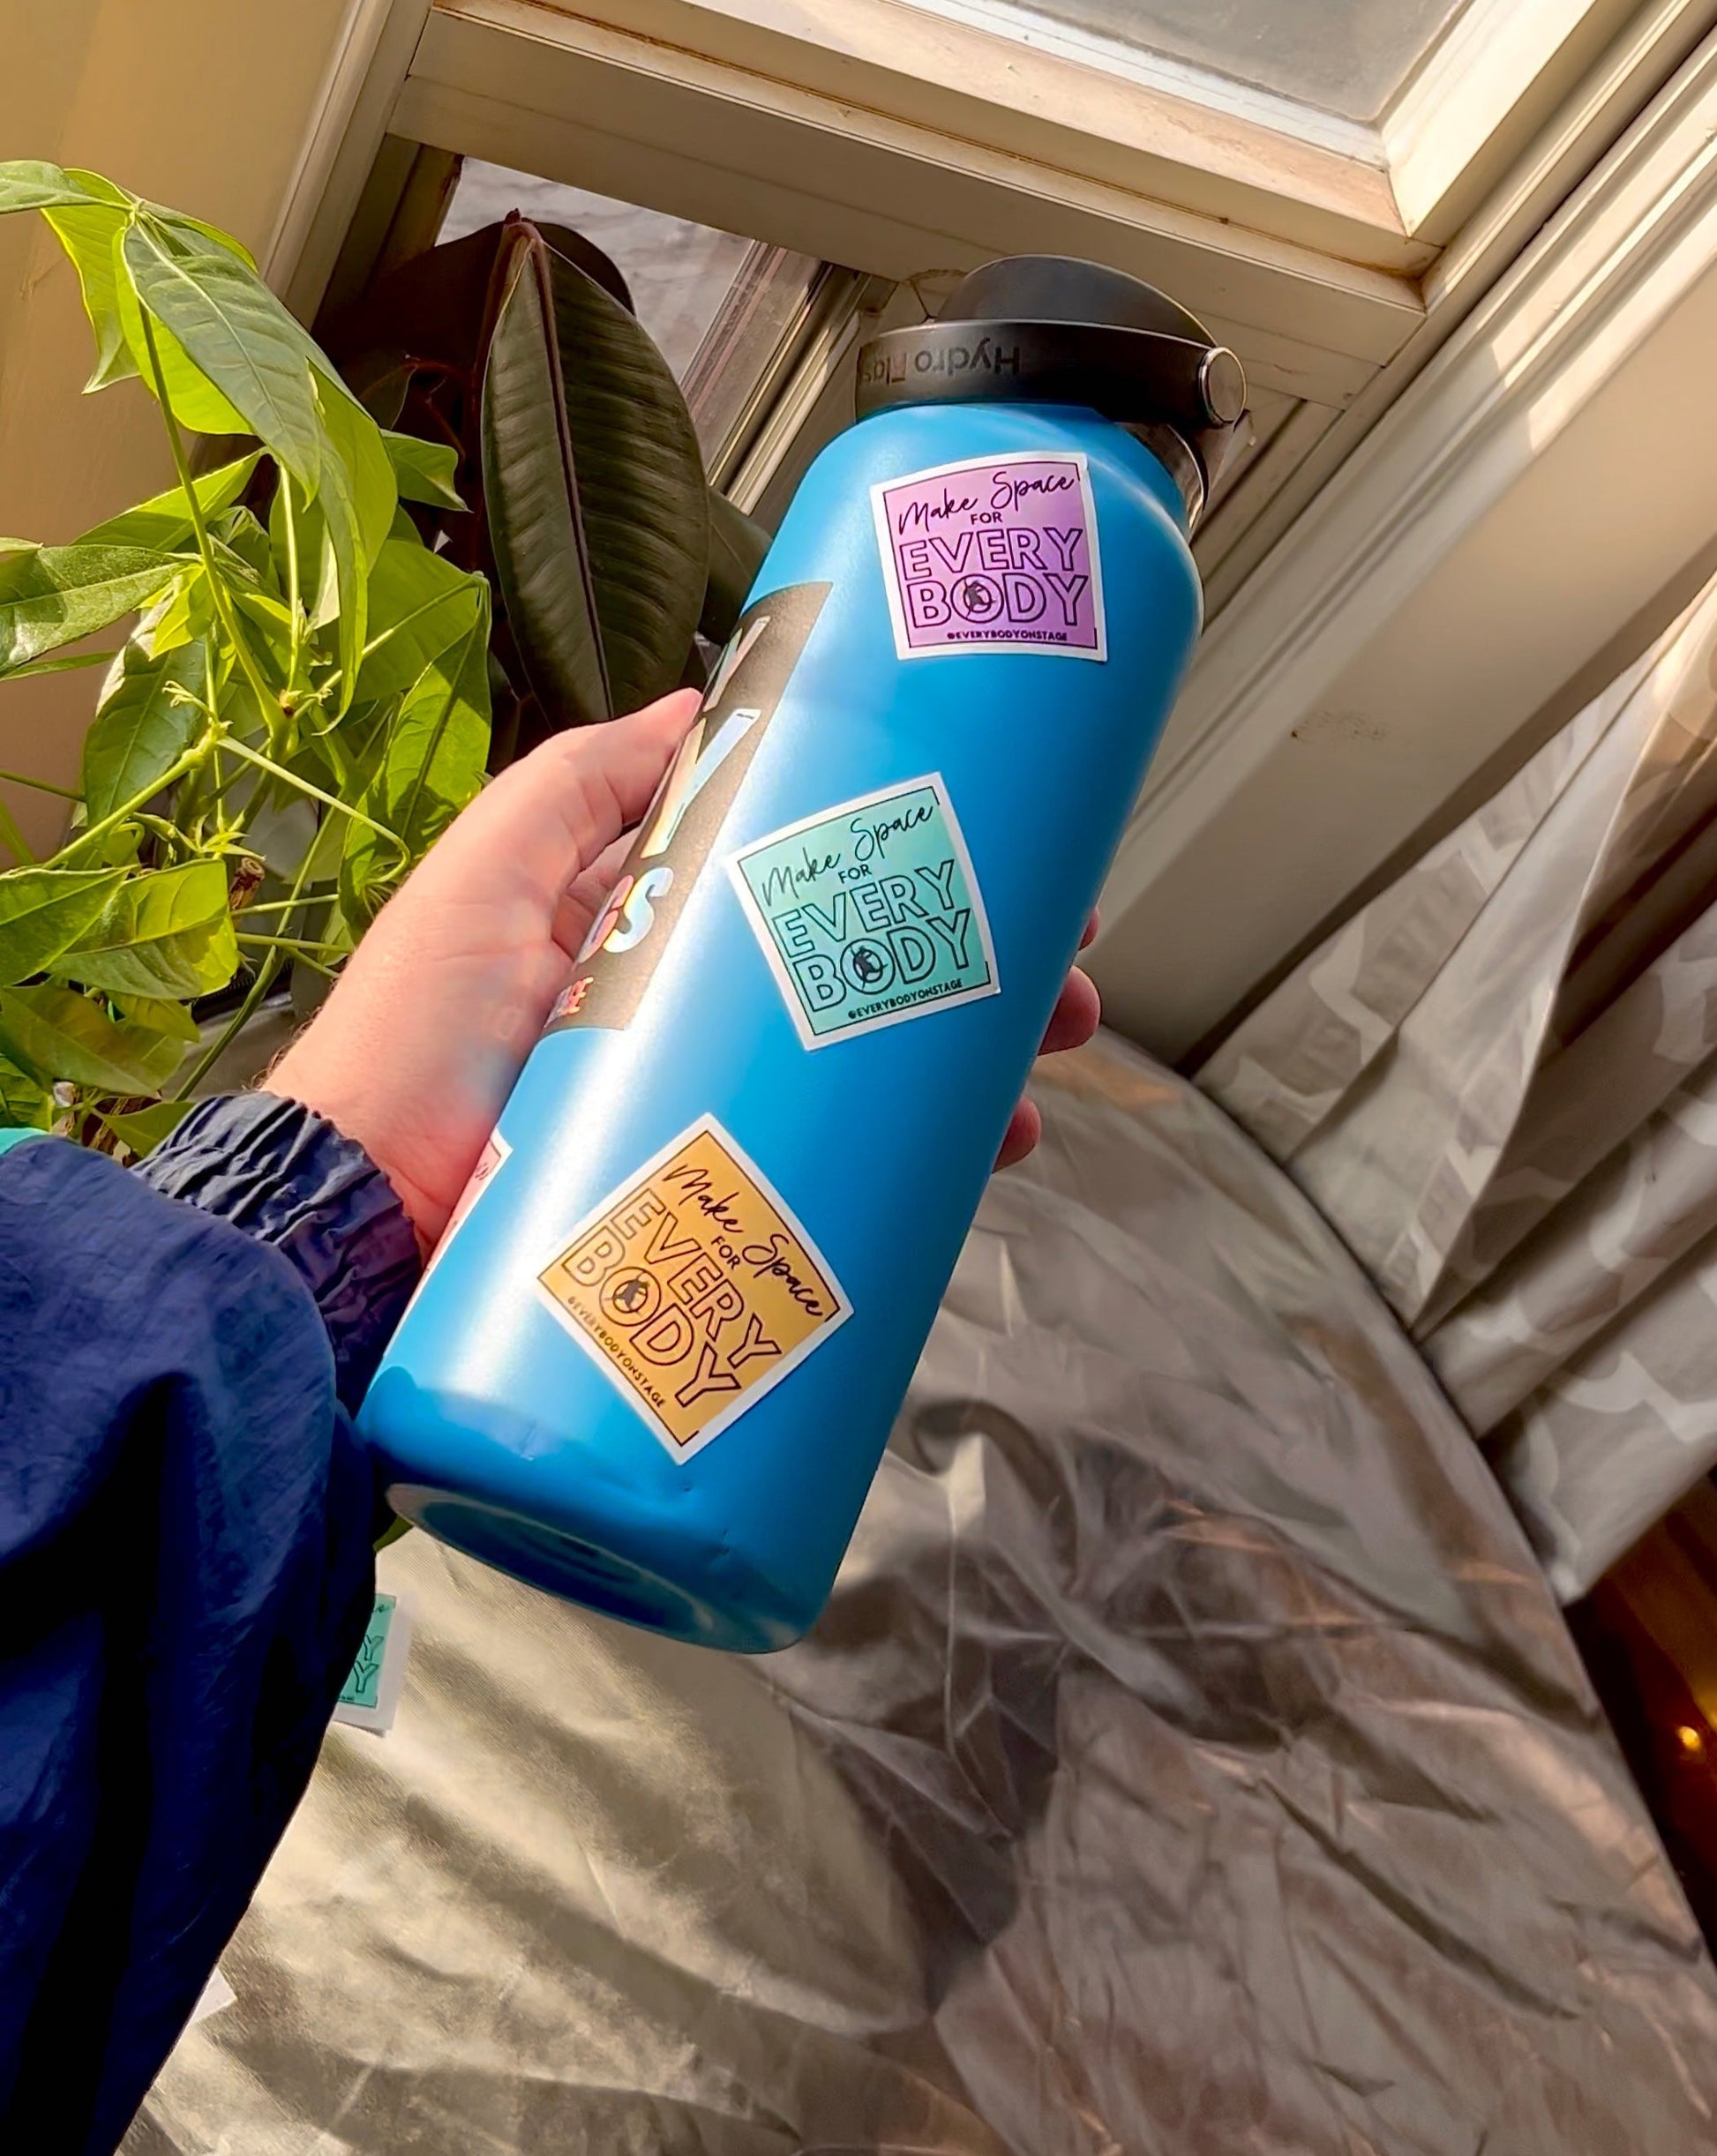 a blue water bottle with colourful stickers that say "Make space for EveryBODY" with the @EveryBODYonStage tag at the bottom.